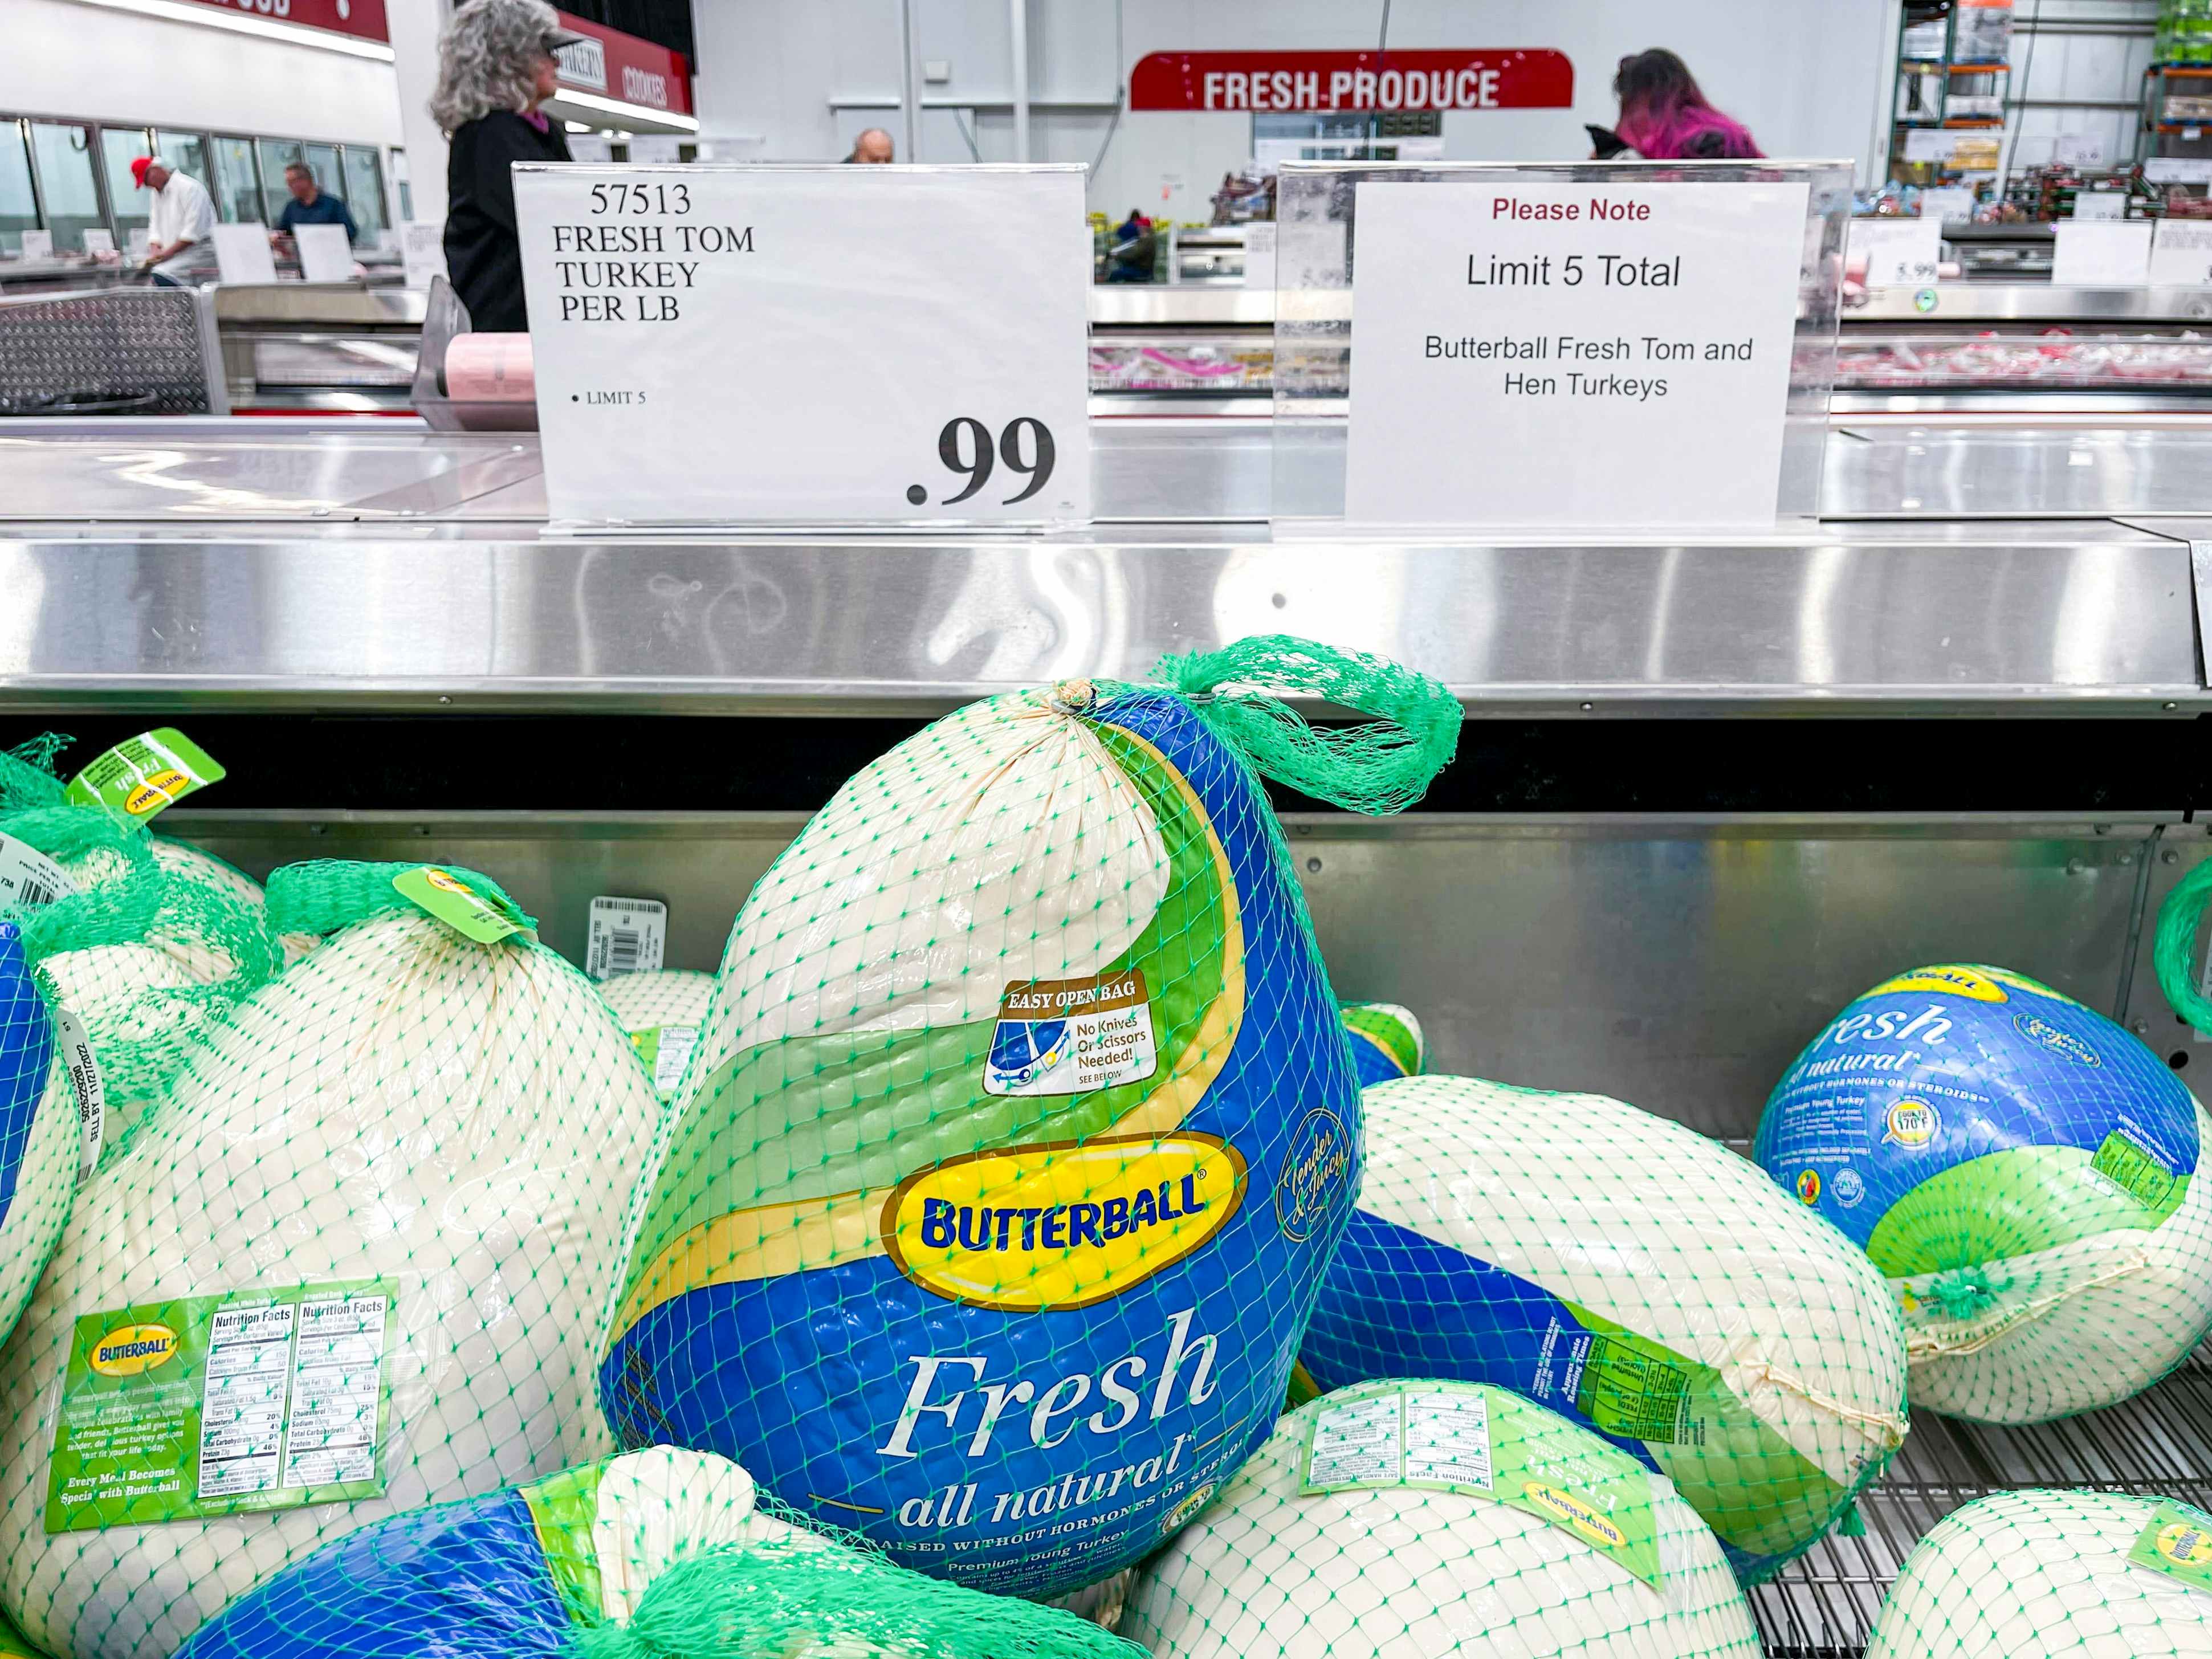 Whole Fresh Butterball turkeys in the refrigerated meat section of Costco with a sign showing them to be 99 cents per pound and another sign that reads, "Please Note, Limit 5 Total, Butterball fresh tom and hen turkeys